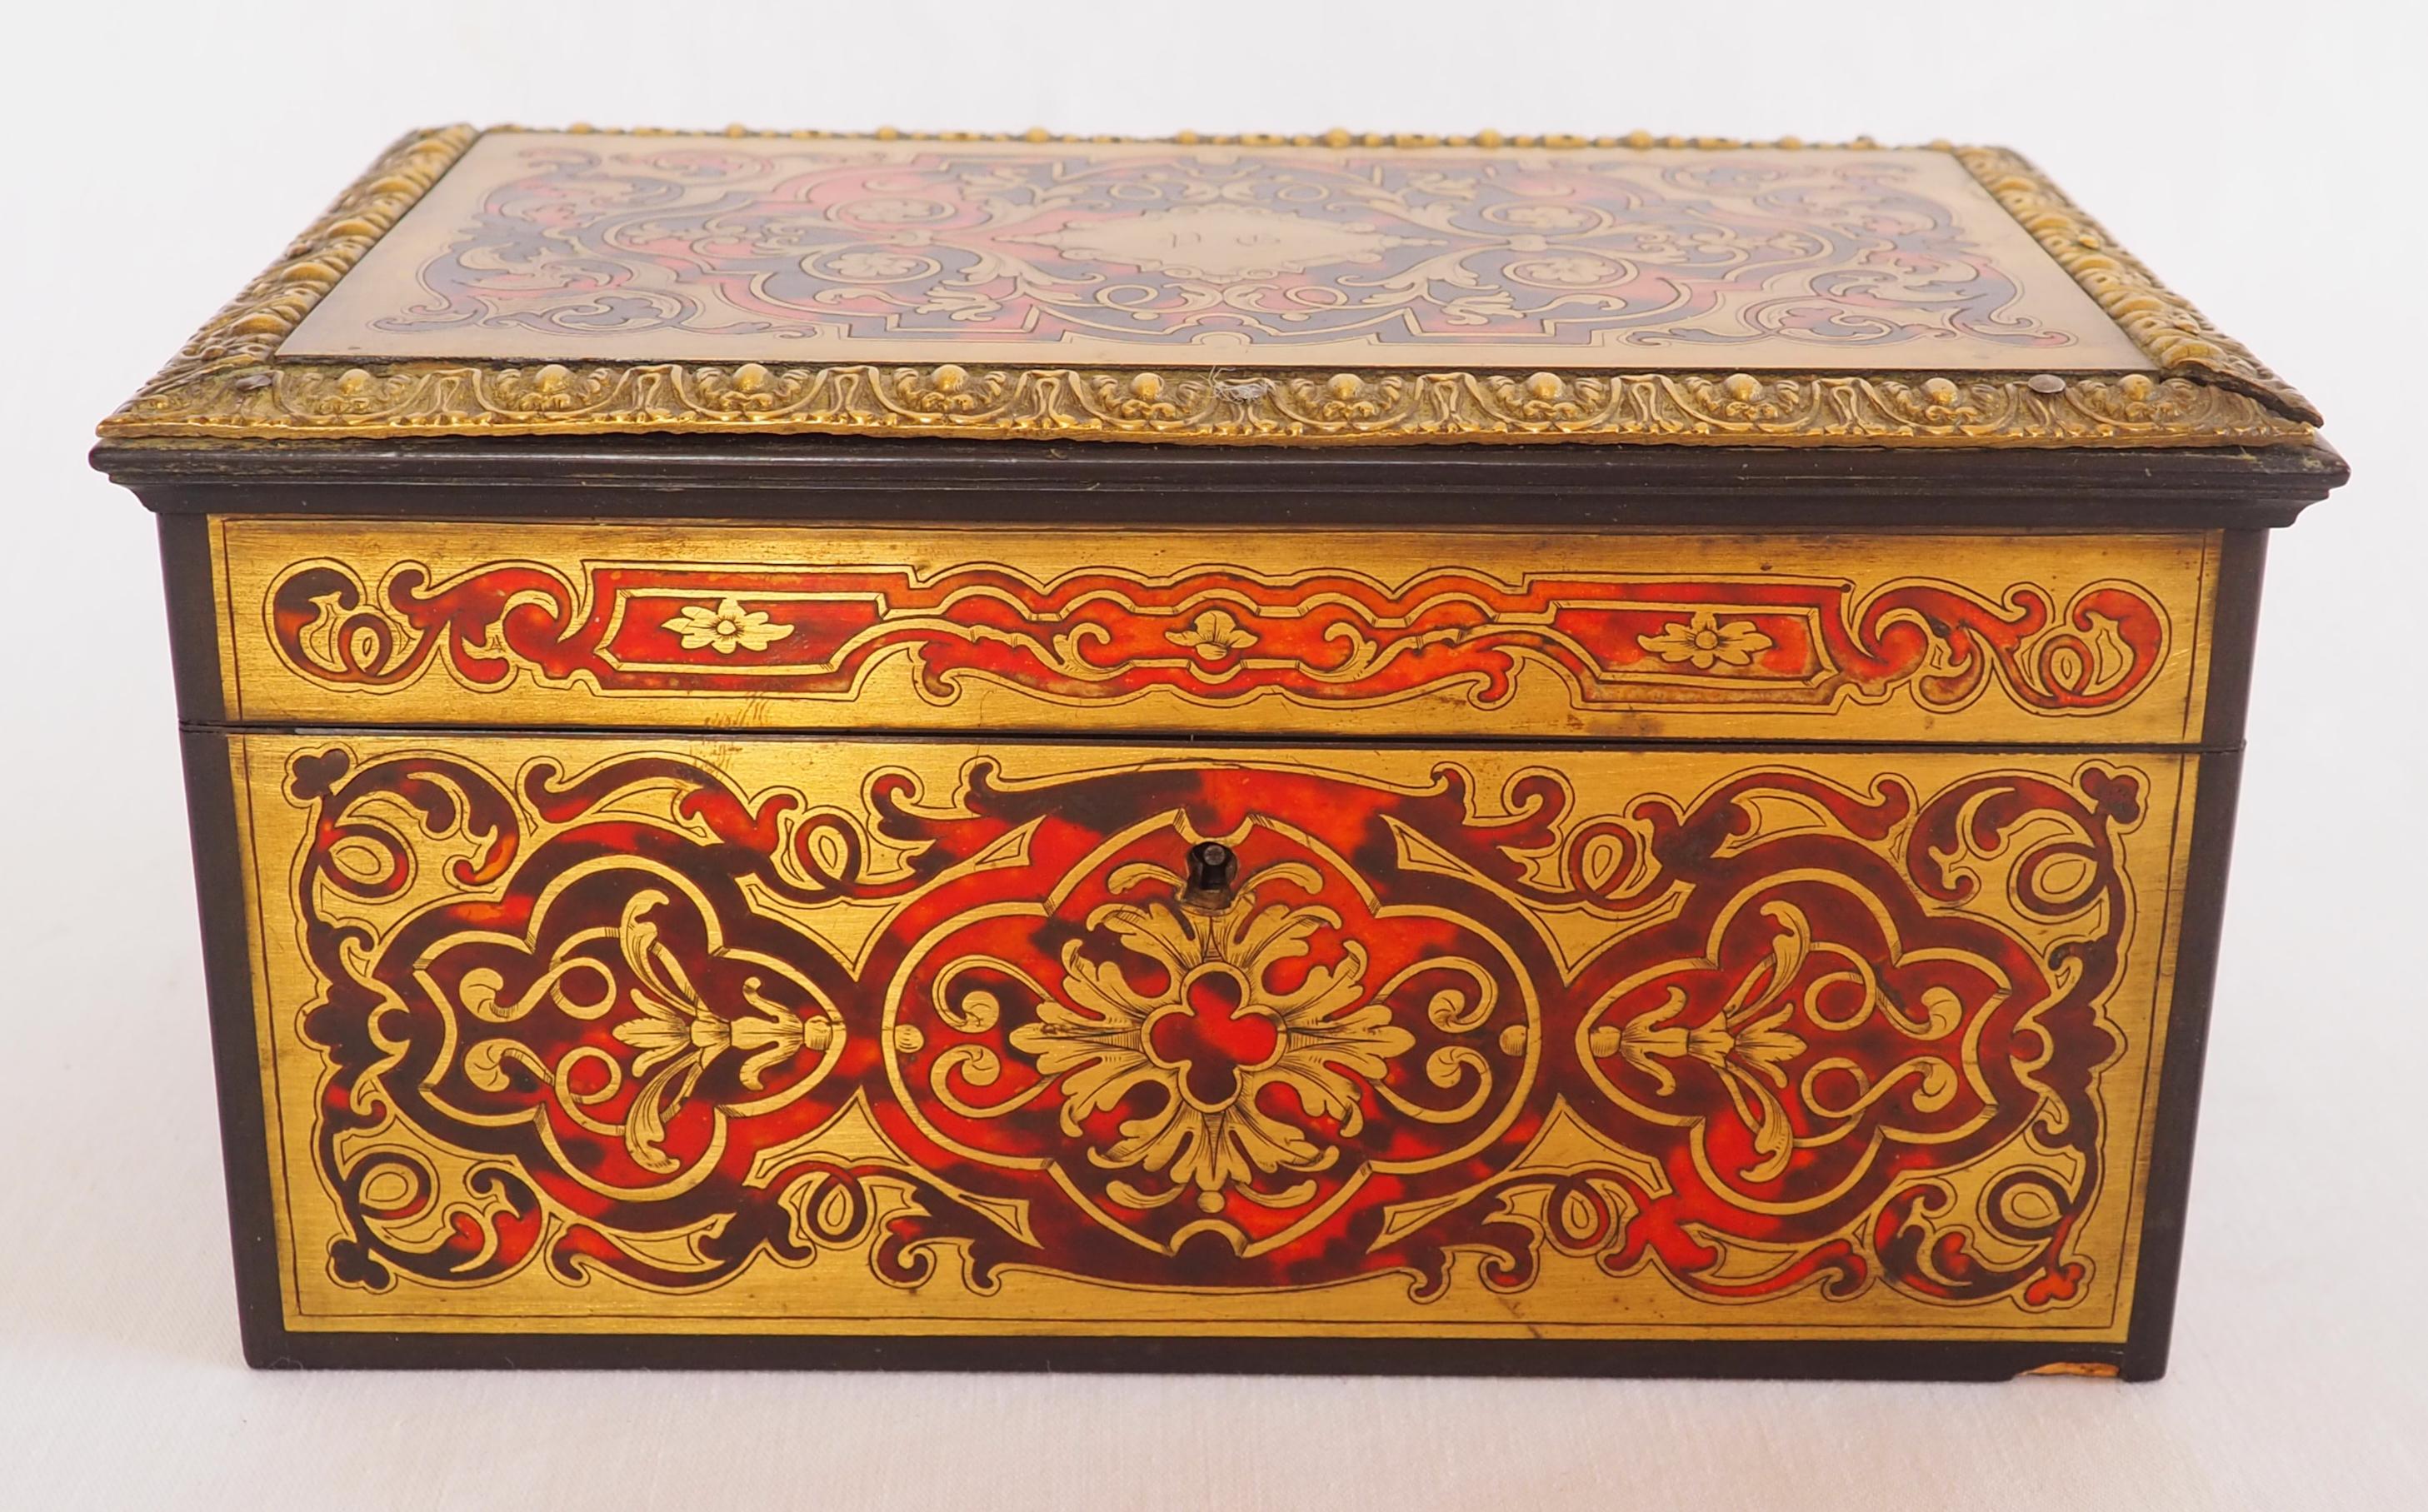 Beautiful Boulle marquetry and blackened wood tea box / tea caddy, brass pattern inlaid, mahogany veneer inside. Mid 19th century circa 1840 - 1850, typical early Napoleon III period production.

A PG monogram is engraved in the brass cartouche on